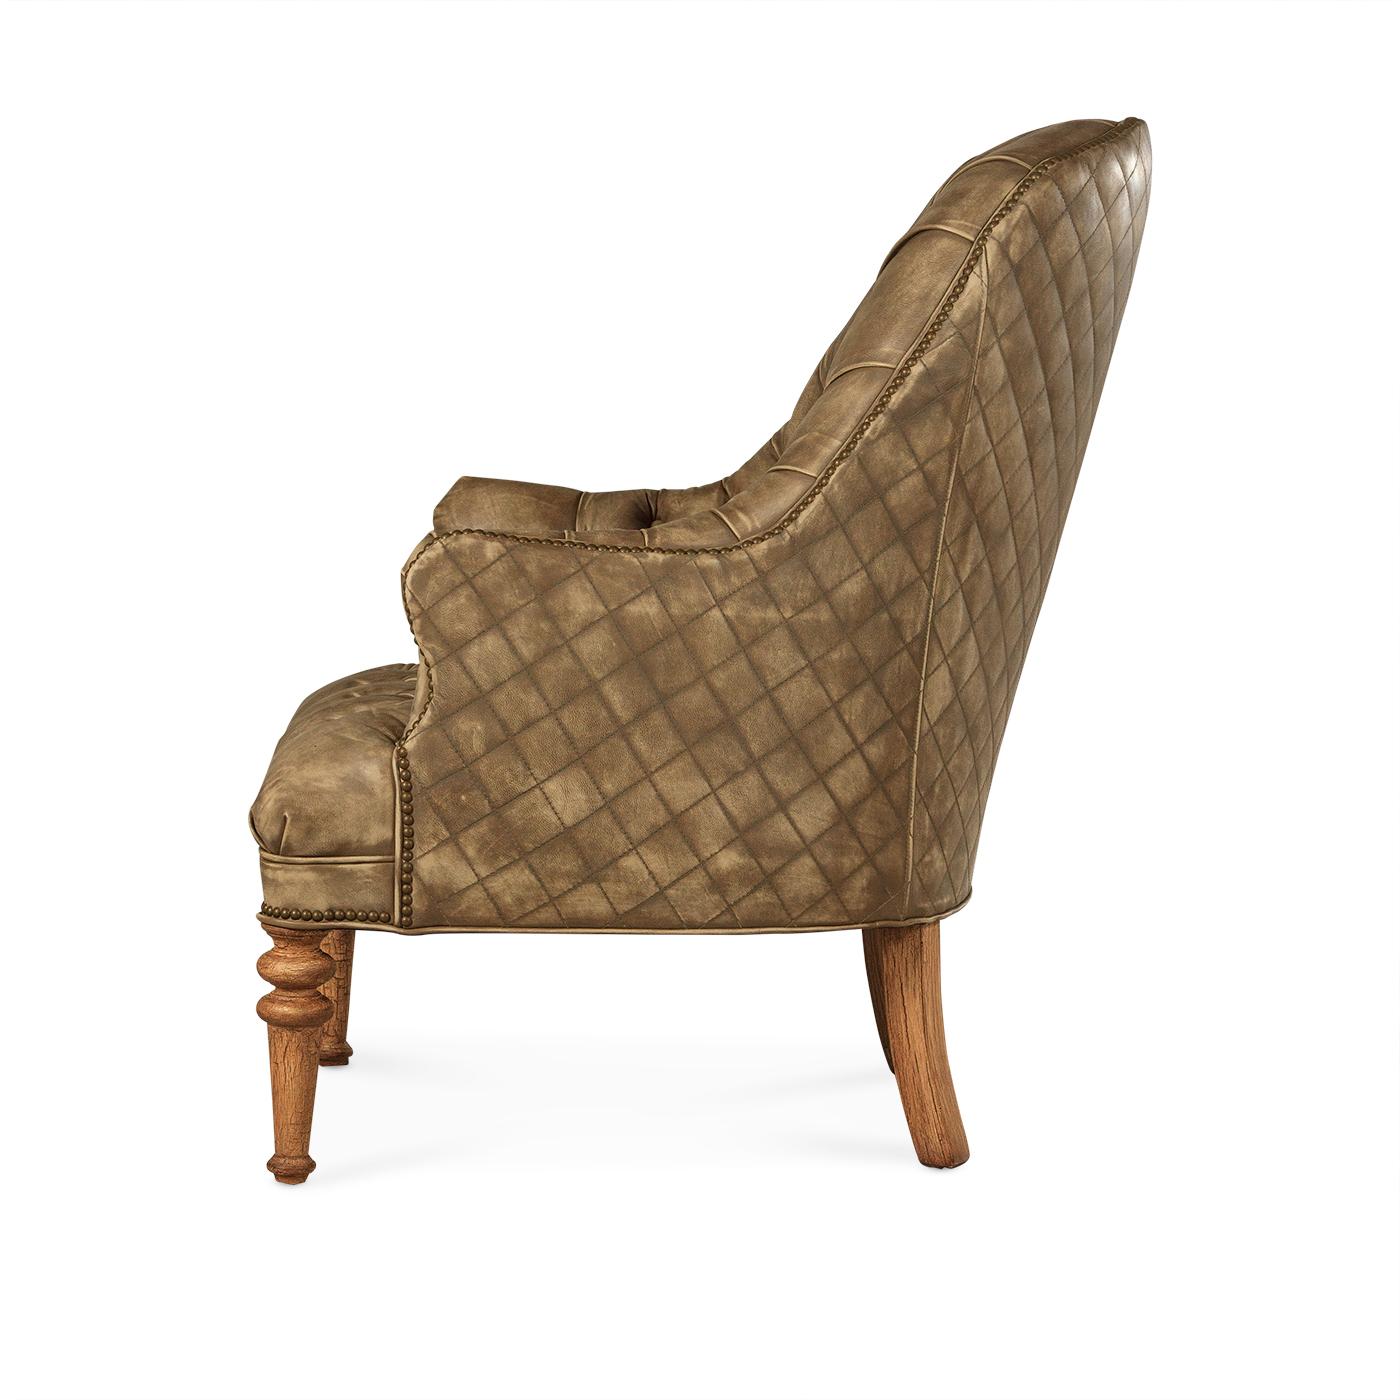 An American Made classic beige tufted leather chair. With a deep tufted arched backrest, seat, and arms. These accent chairs have a unique opposing diamond quilted pattern outside. With natural brass nailhead trim details, it is raised on turned and